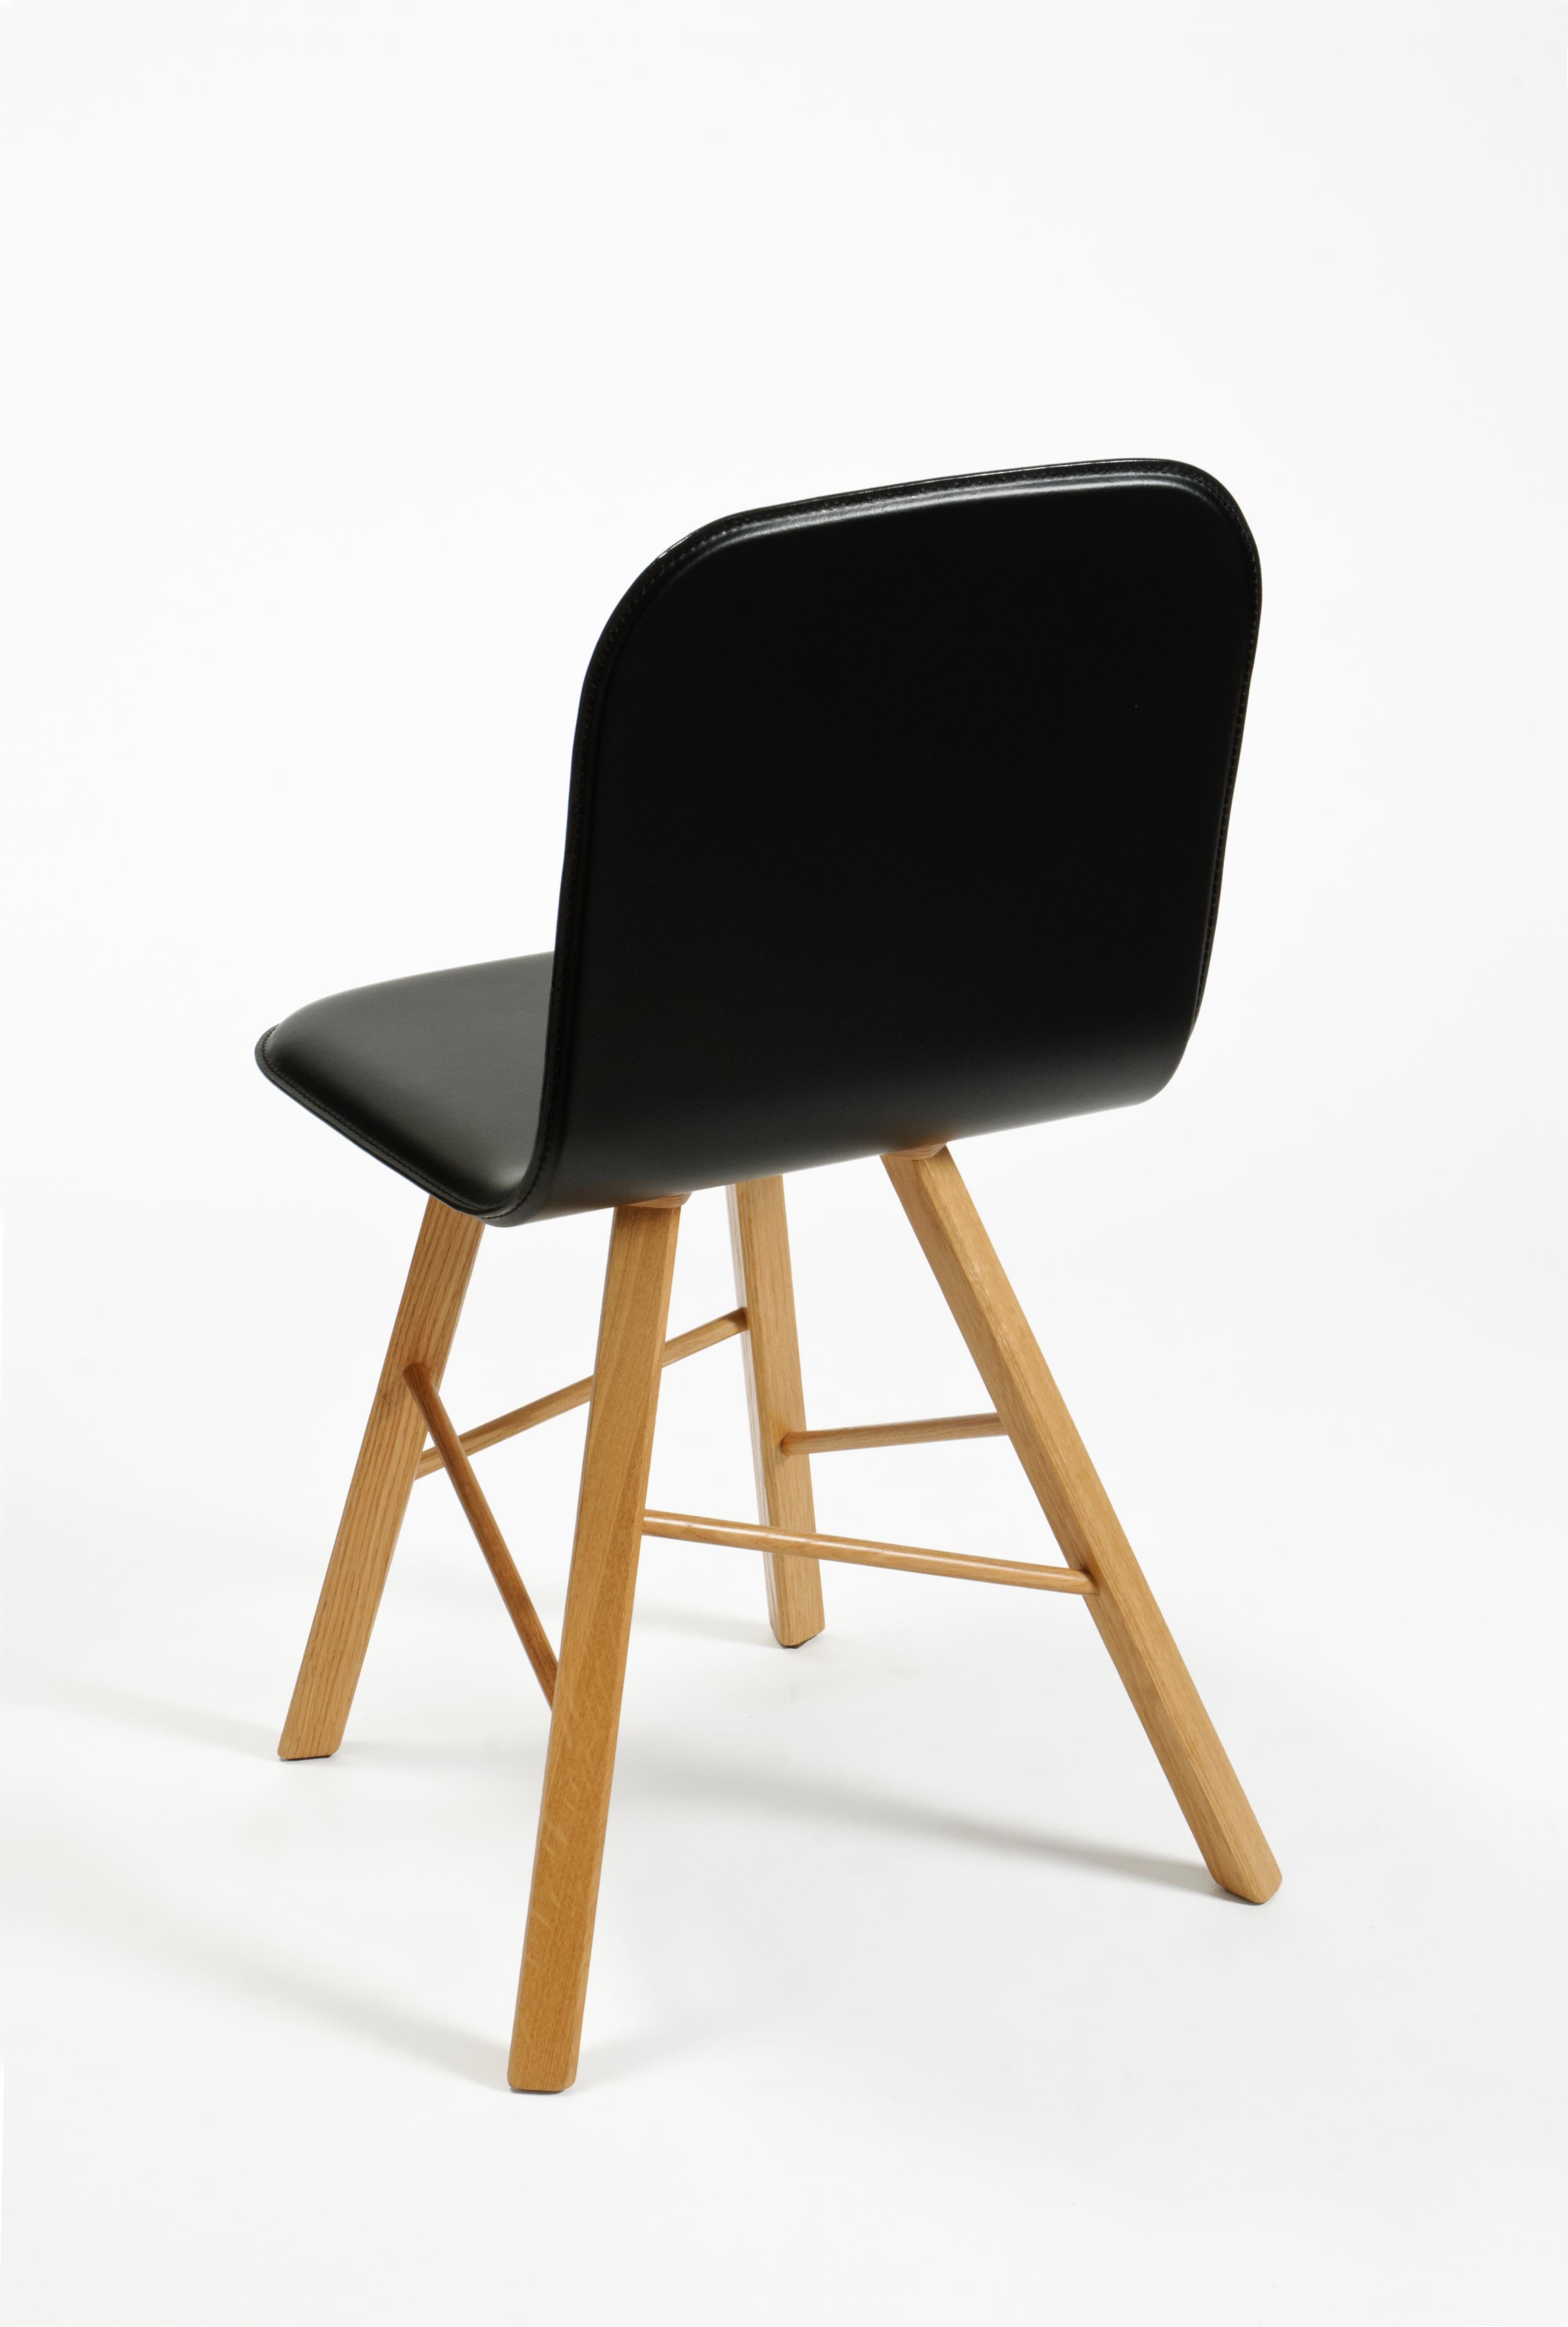 Essential and elegant chair with a bent plywood shell, and four iconic legs with triangular shape in solid oak, joined by transversal wooden bars.
The shell is upholstered in natural leather available also in black and other different colors. In